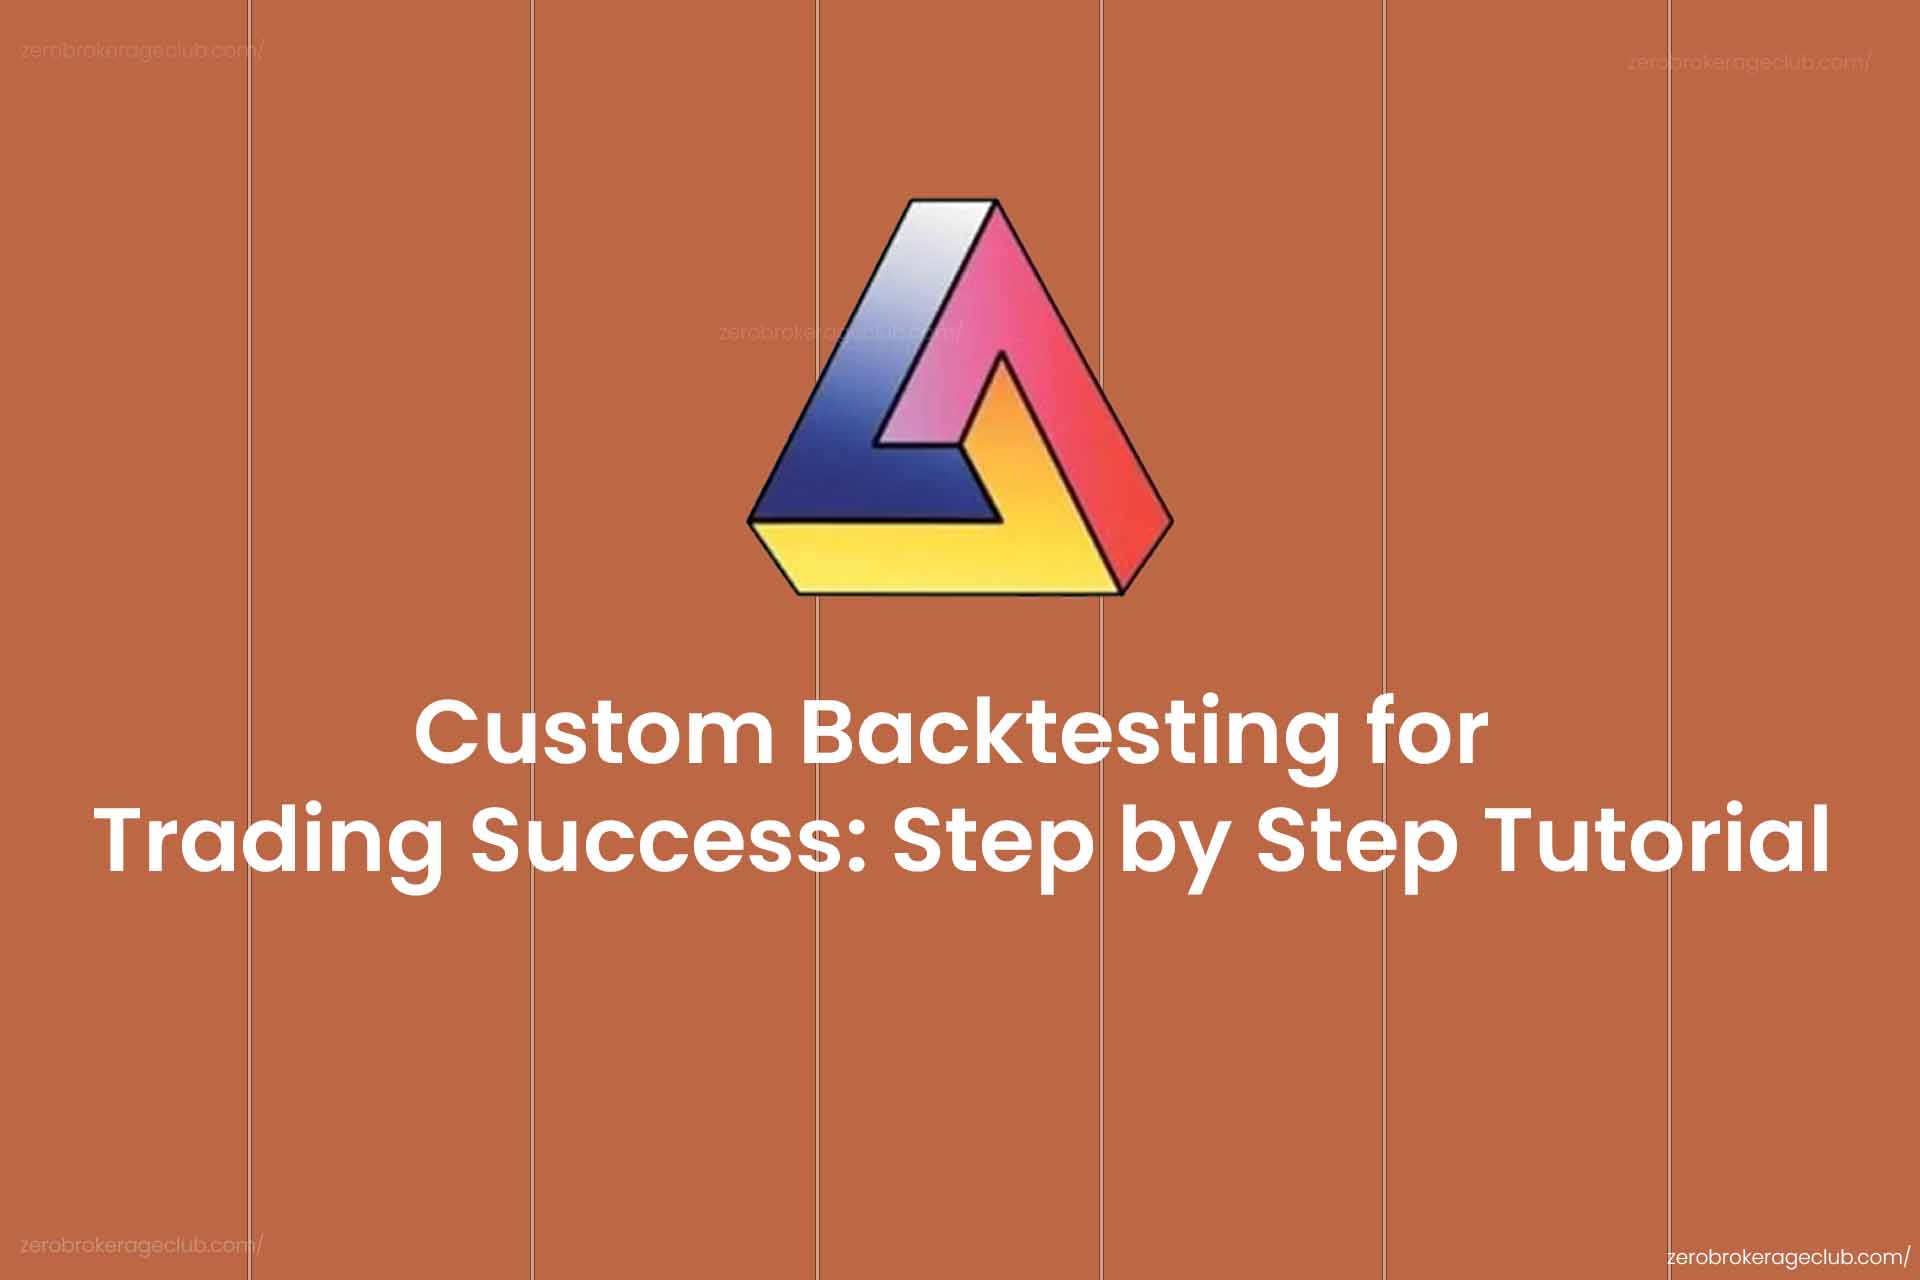 Custom Backtesting for Trading Success: Step by Step Tutorial